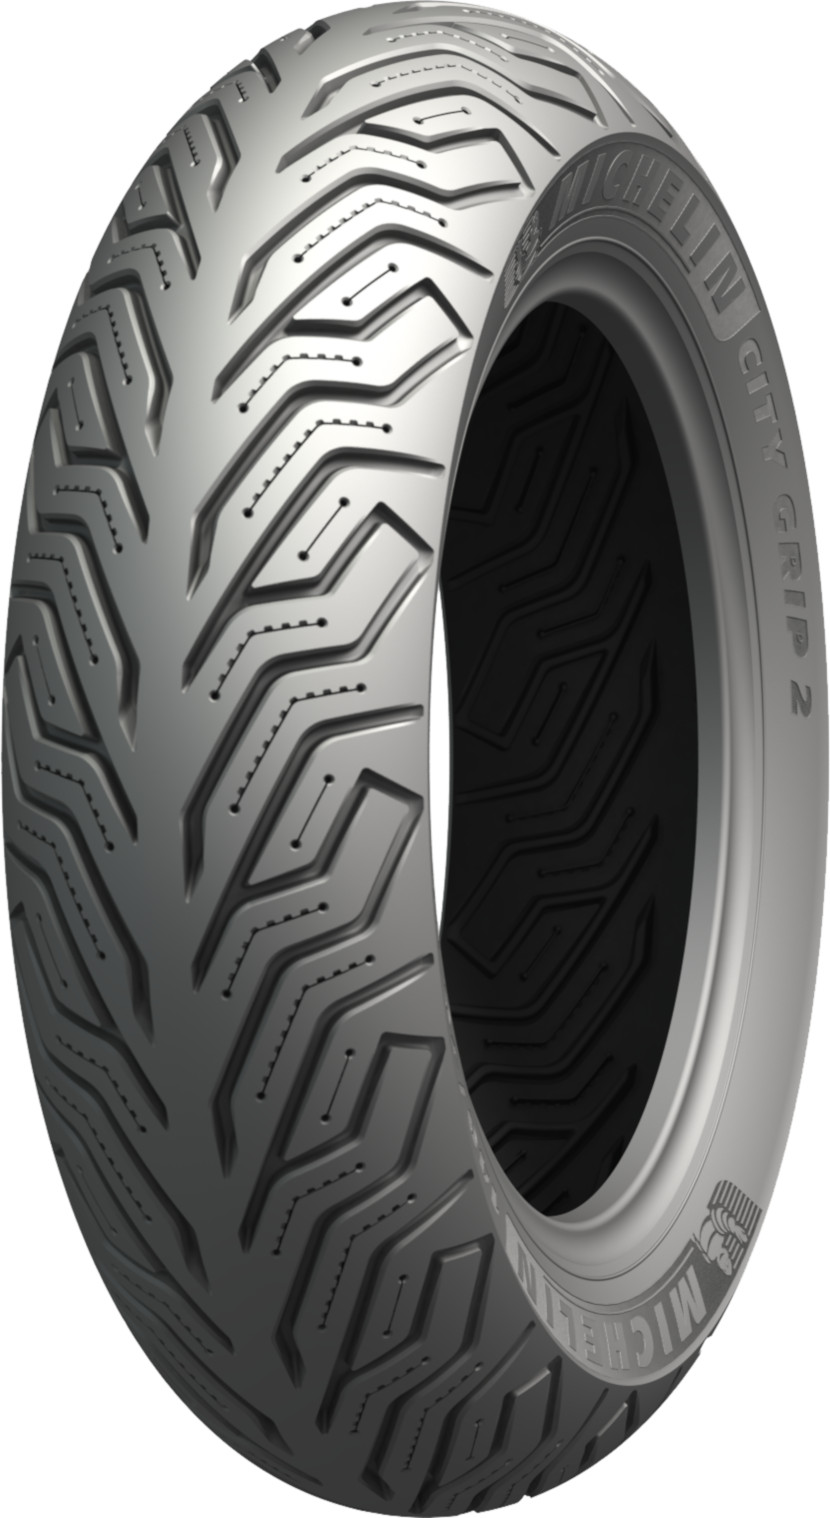 scooter 110/90-12 64S City Grip 2 (F/R) TL Michelin